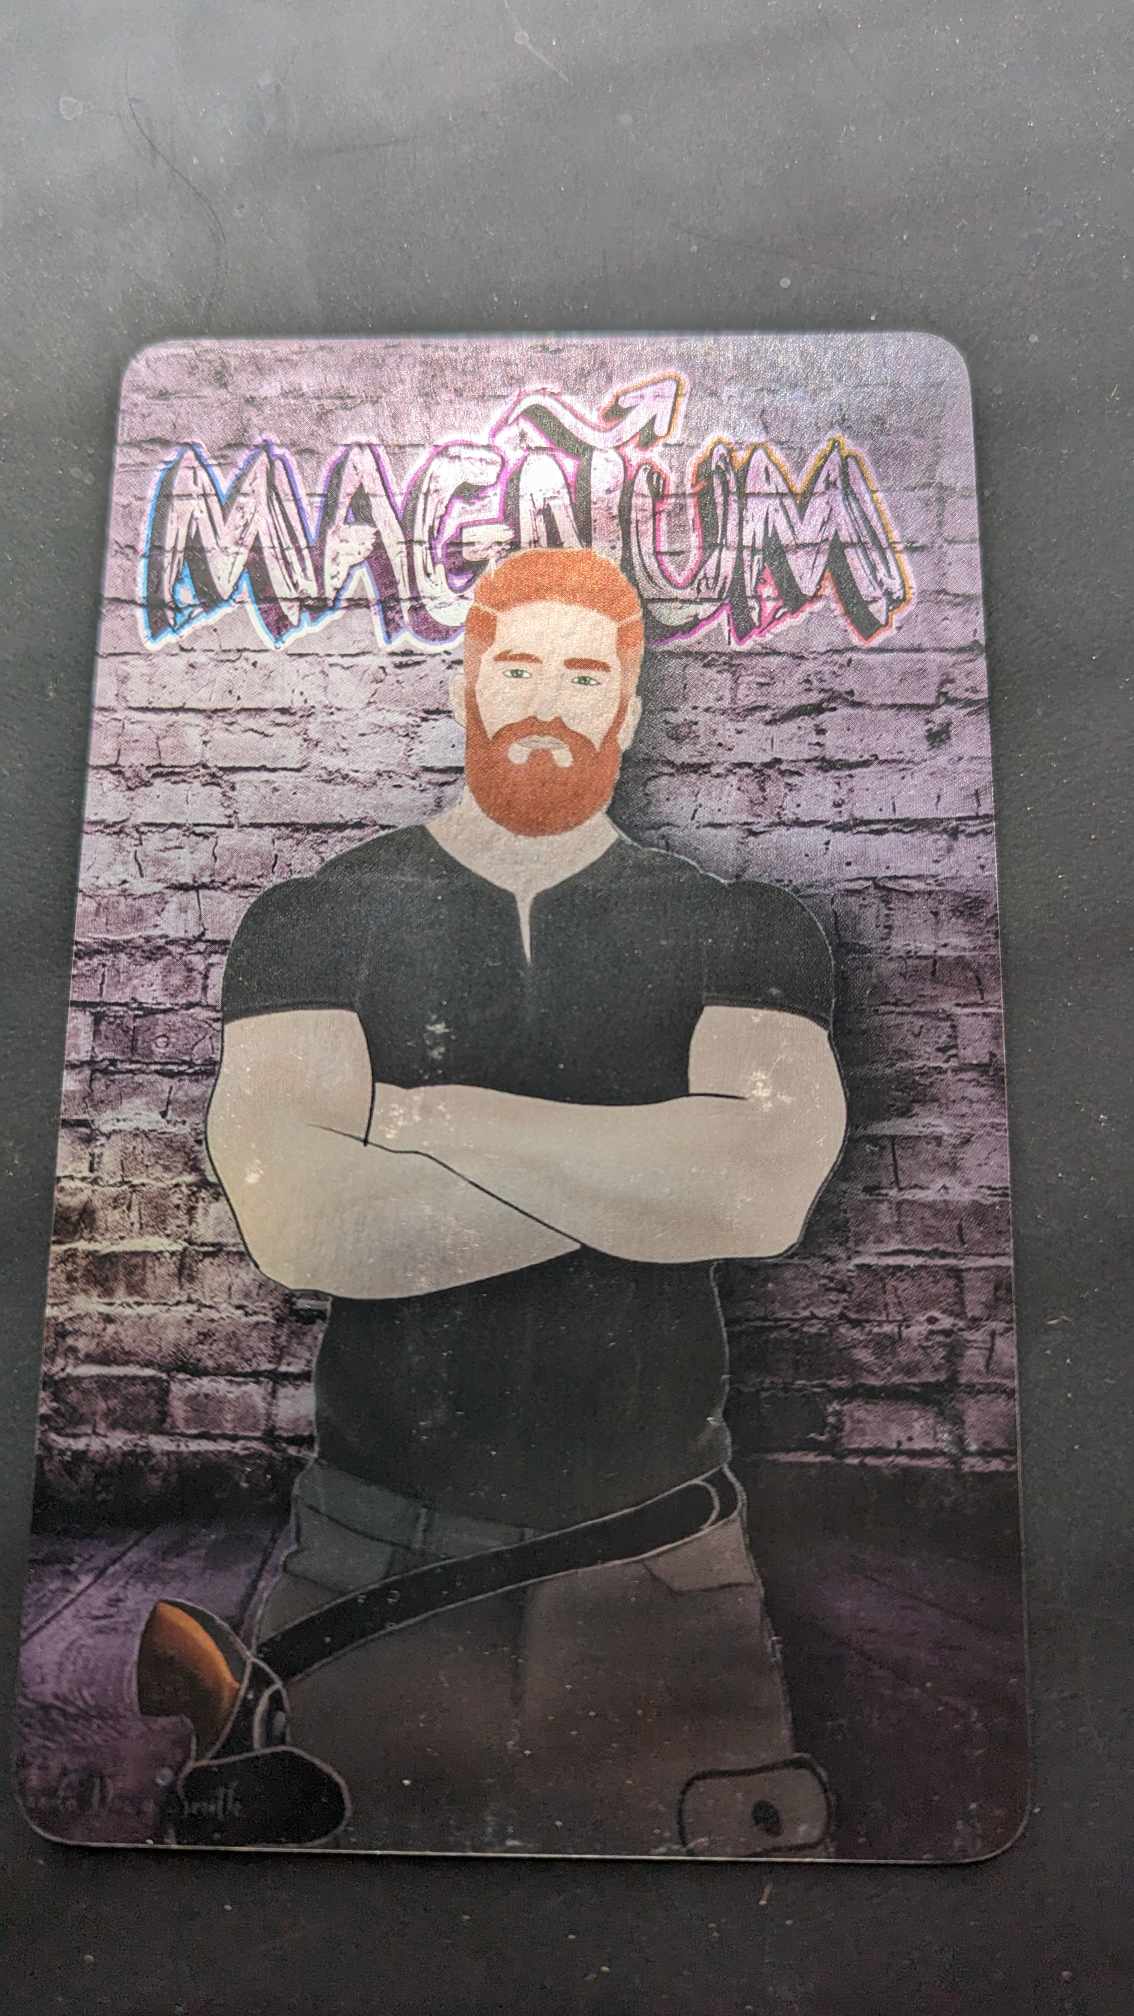 Heights Crew Character Card - Magnum